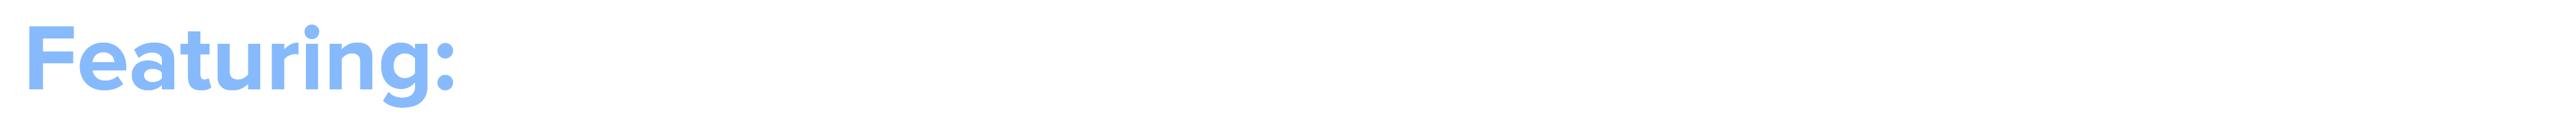 logo-high-res-wide